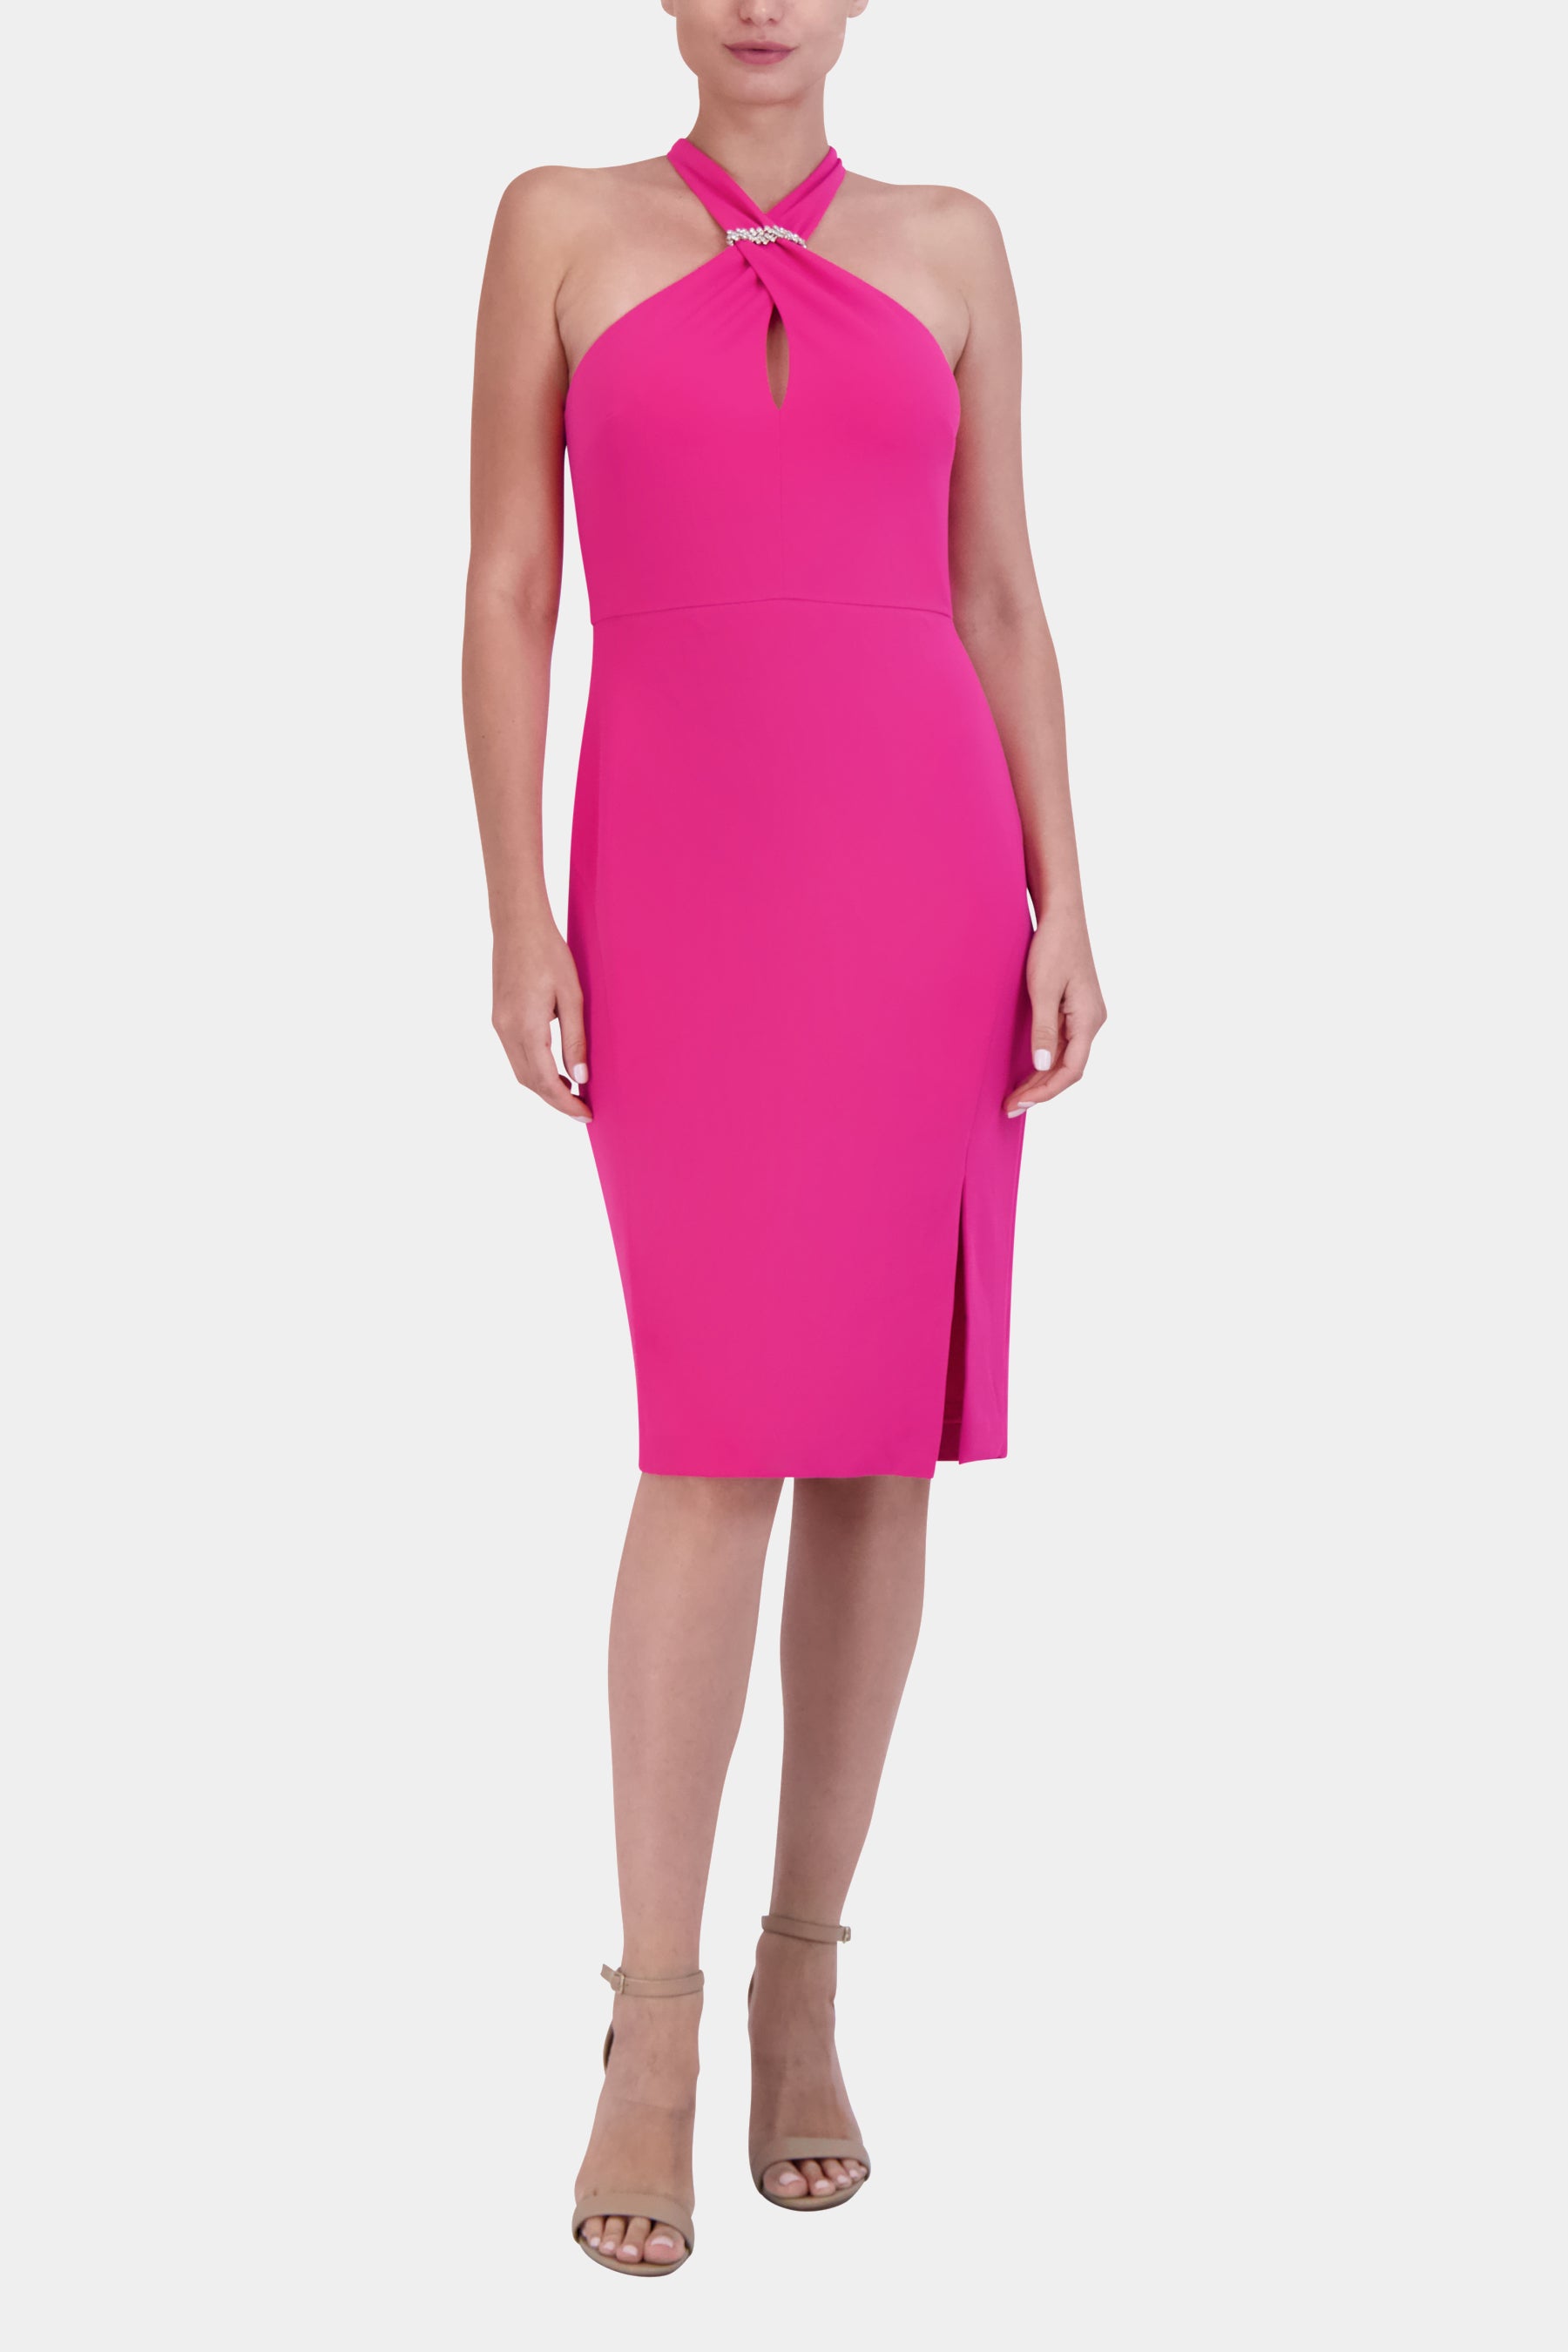 Lord & Taylor Women's Dresses On Sale Up To 90% Off Retail